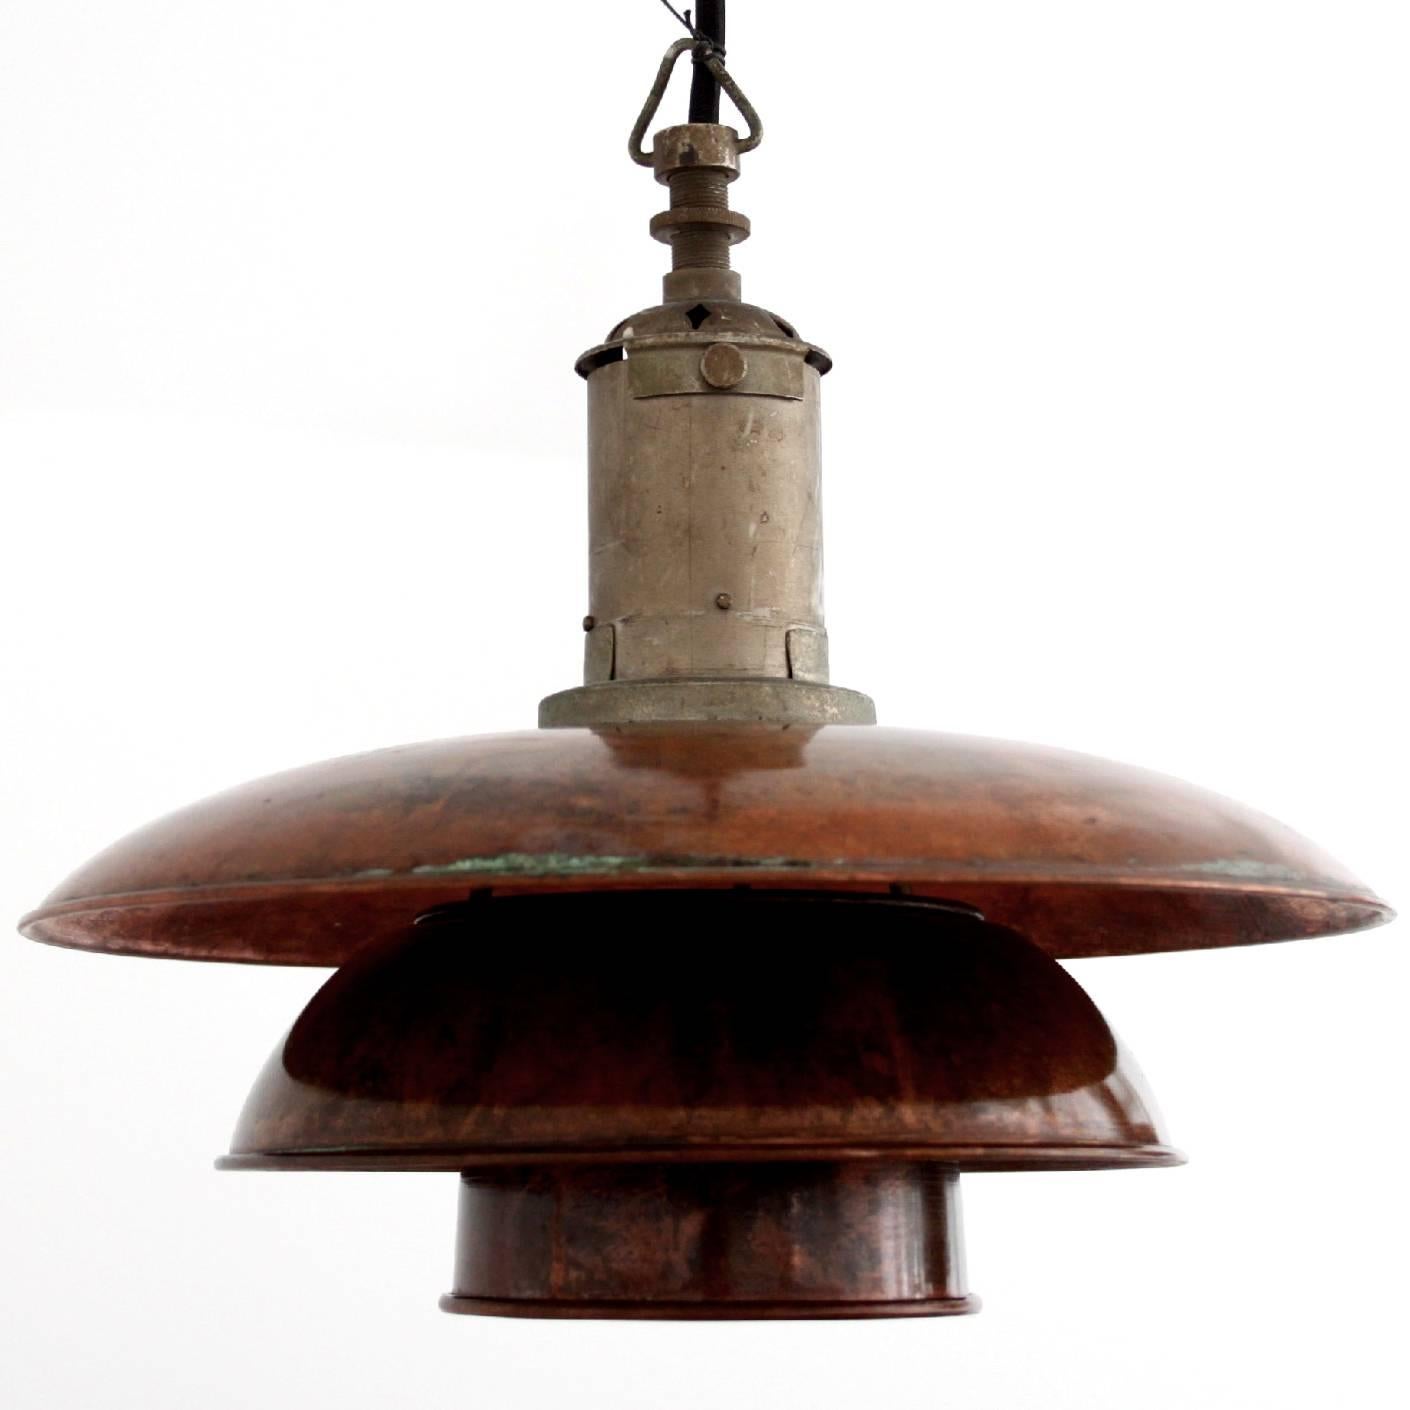 Pair of early and rare ceiling lights, type 3/3 designed by Poul Henningsen. 

Manufactured by Louis Poulsen, Copenhagen, Denmark, circa 1926. Each light fixture impressed with PAT. APPL.

Copper.

Measures: D: 30 cm (11 3/4 in.) H 22 cm (8 5/8